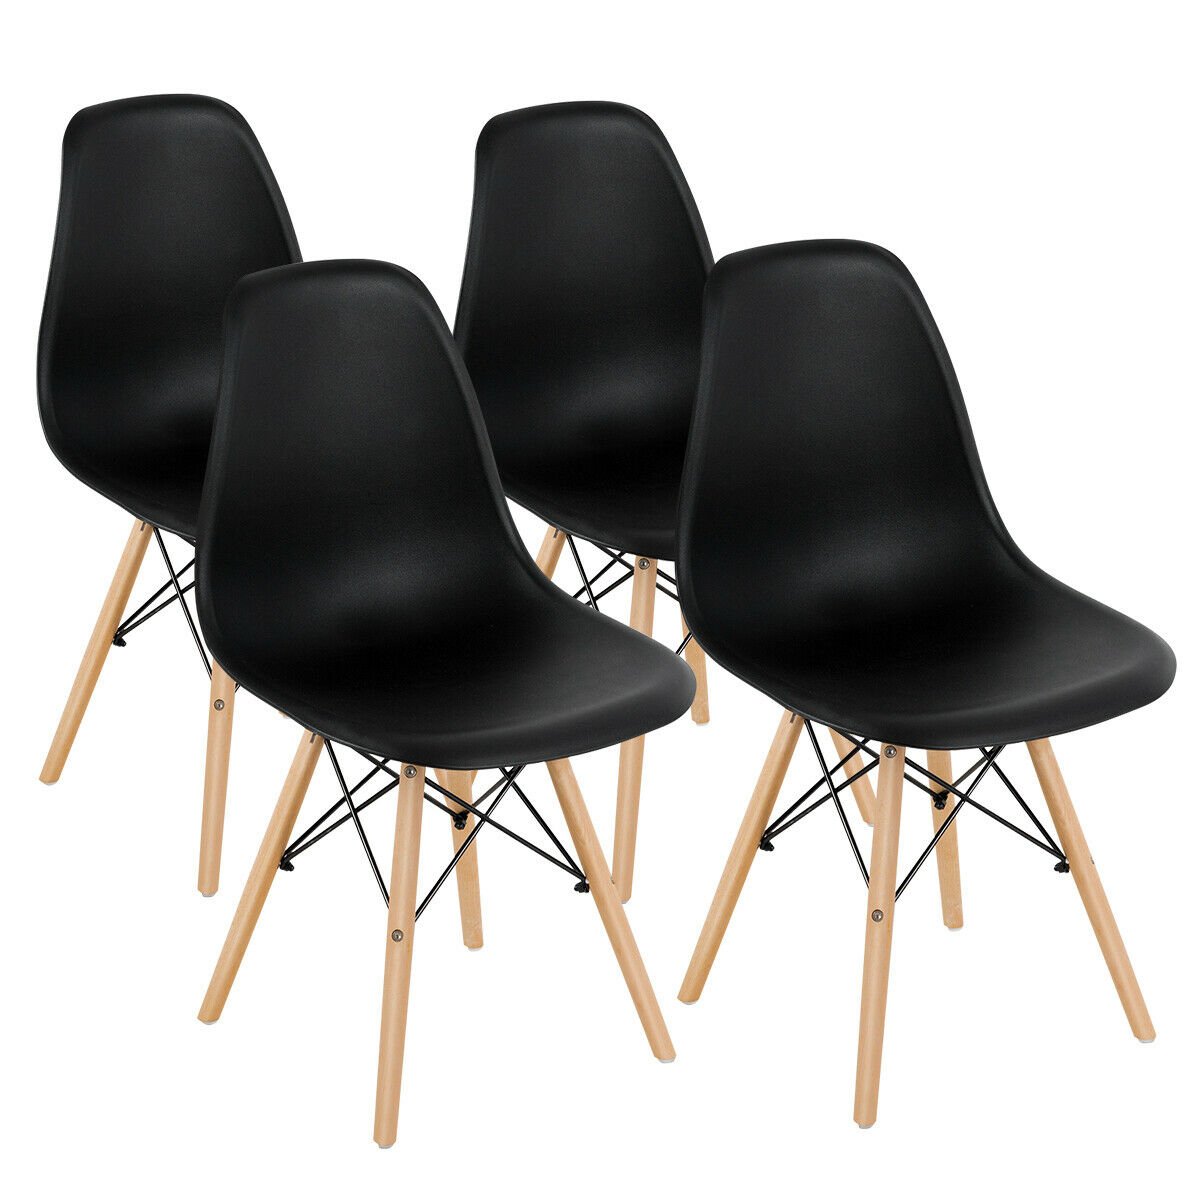 Set Of 4 Modern Dining Side Chair Armless Home Office W/ Wood Legs Black